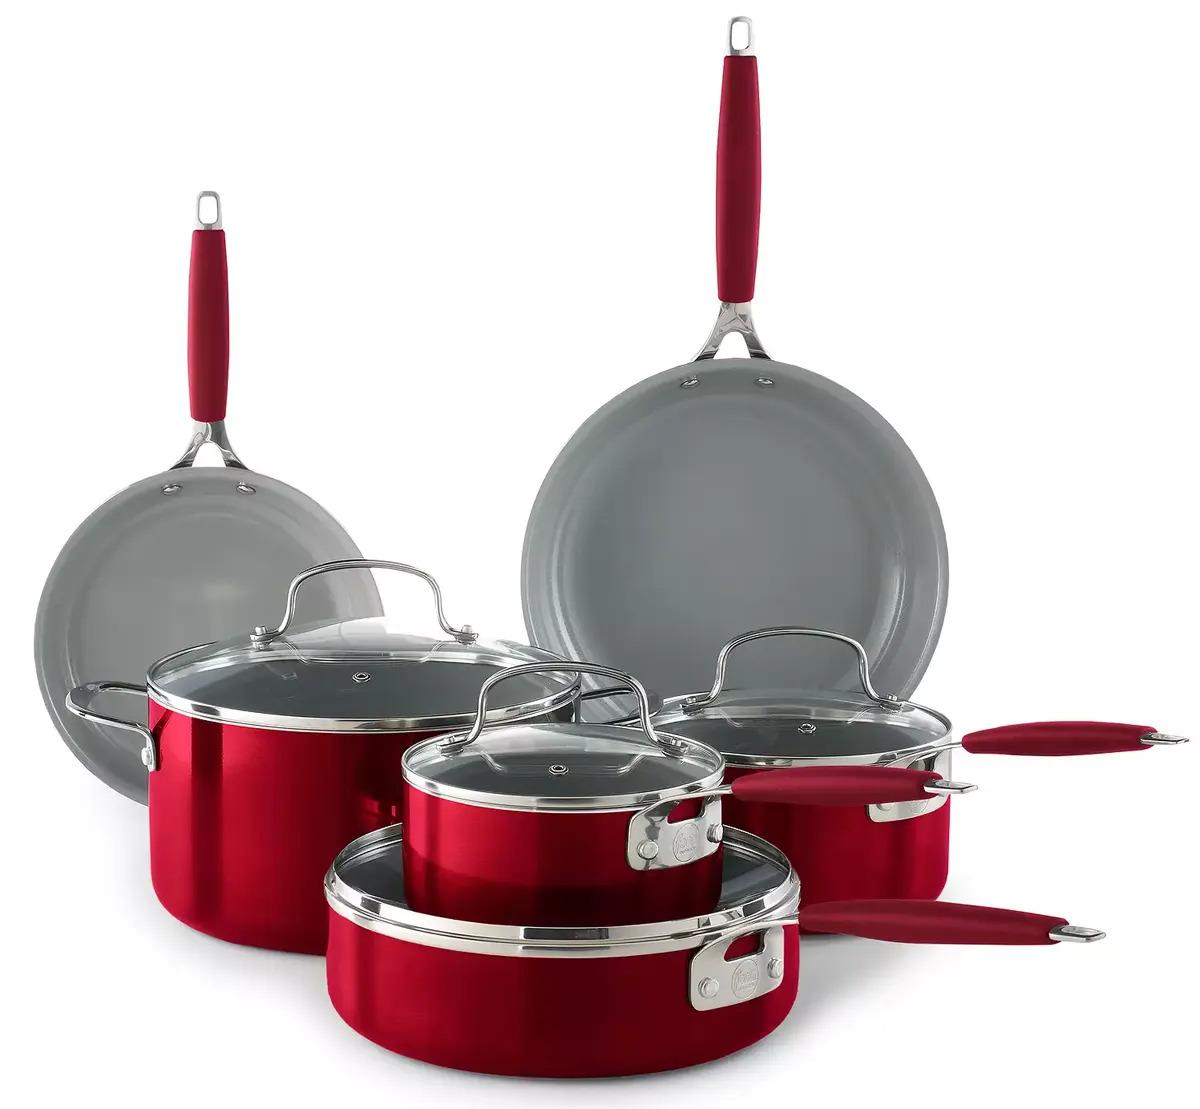 Food Network 10-Piece Nonstick Ceramic Cookware Set for $39.99 Shipped